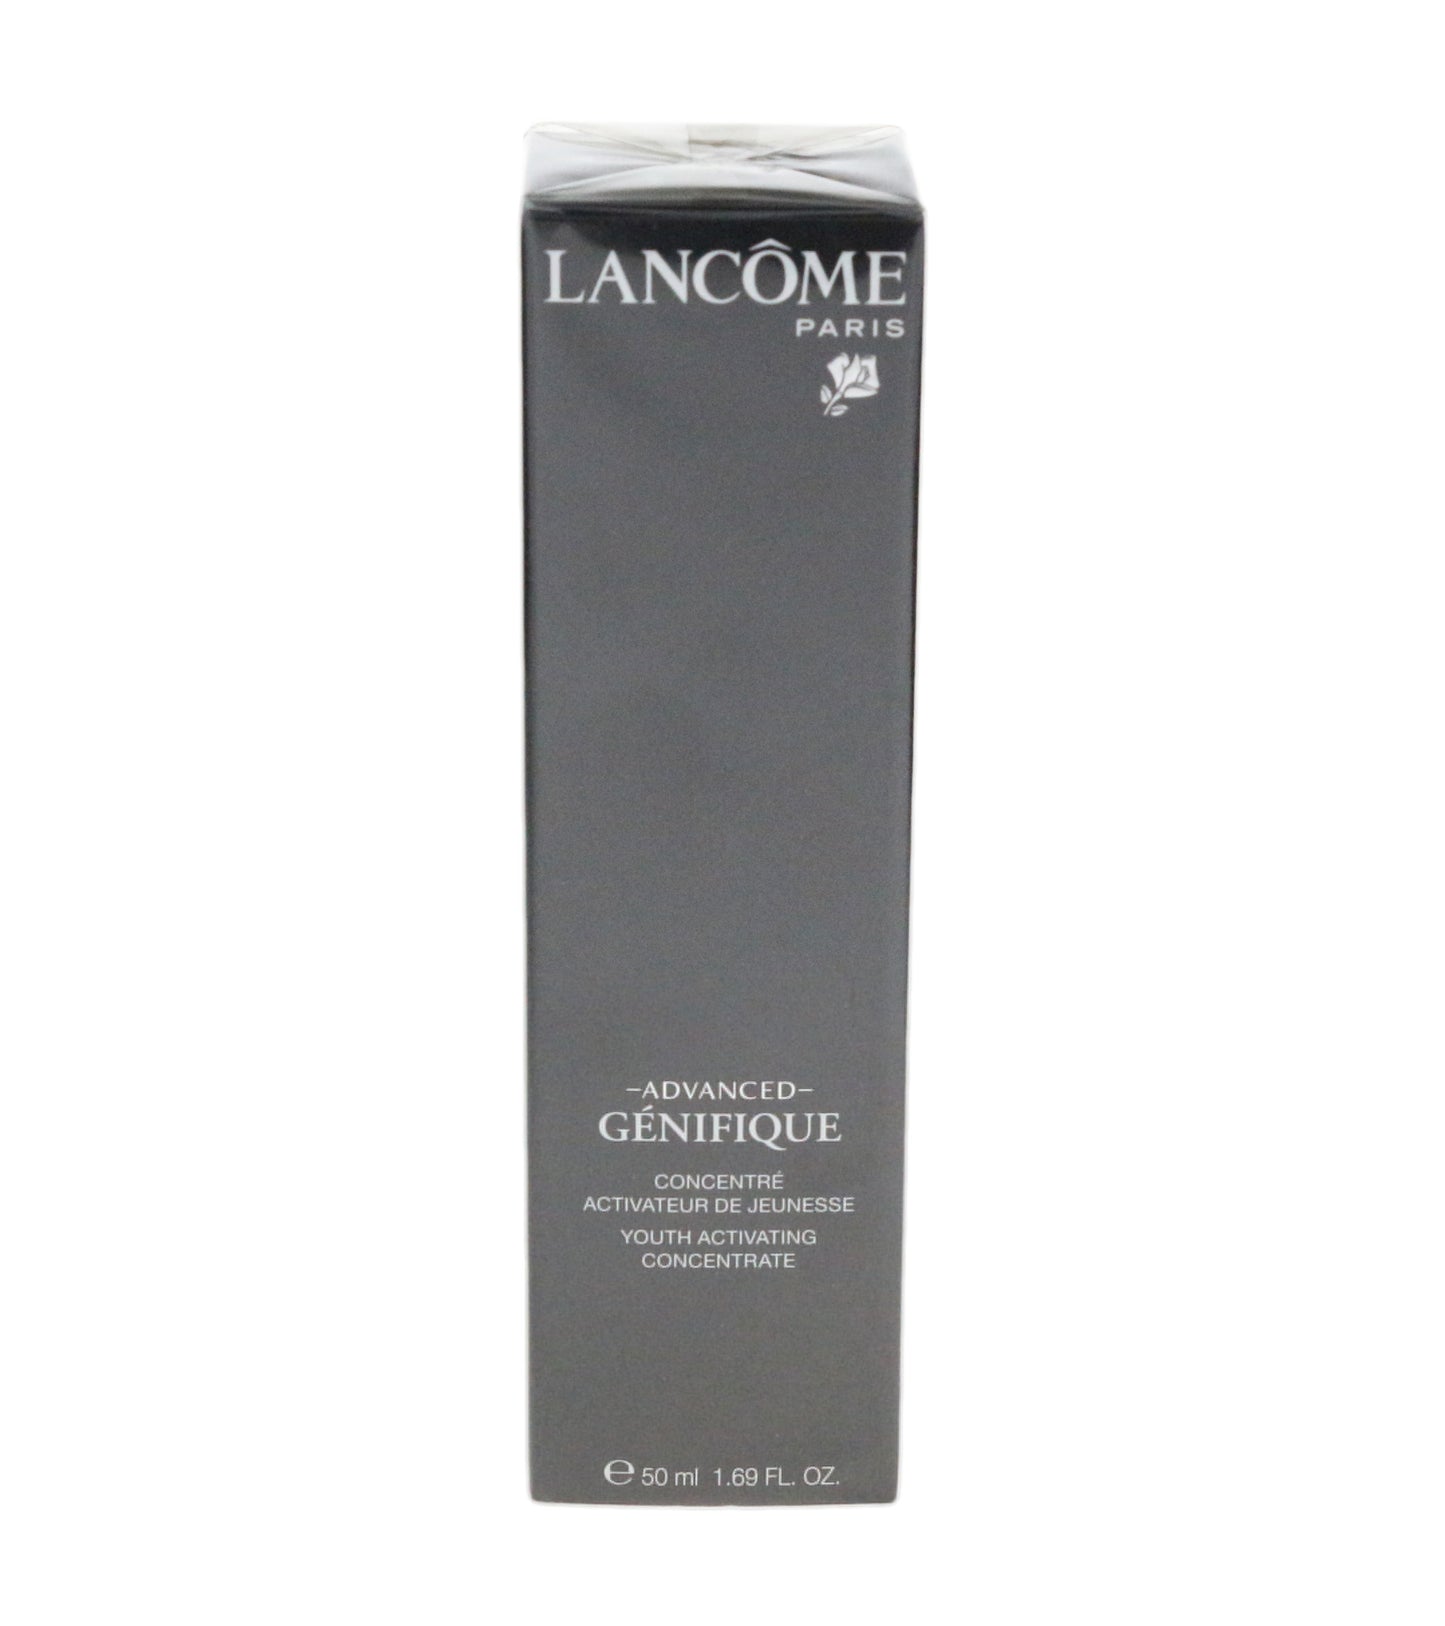 Lancome Advanced Genifique Youth Activating Concentrate 1.69oz/50ml New In Box